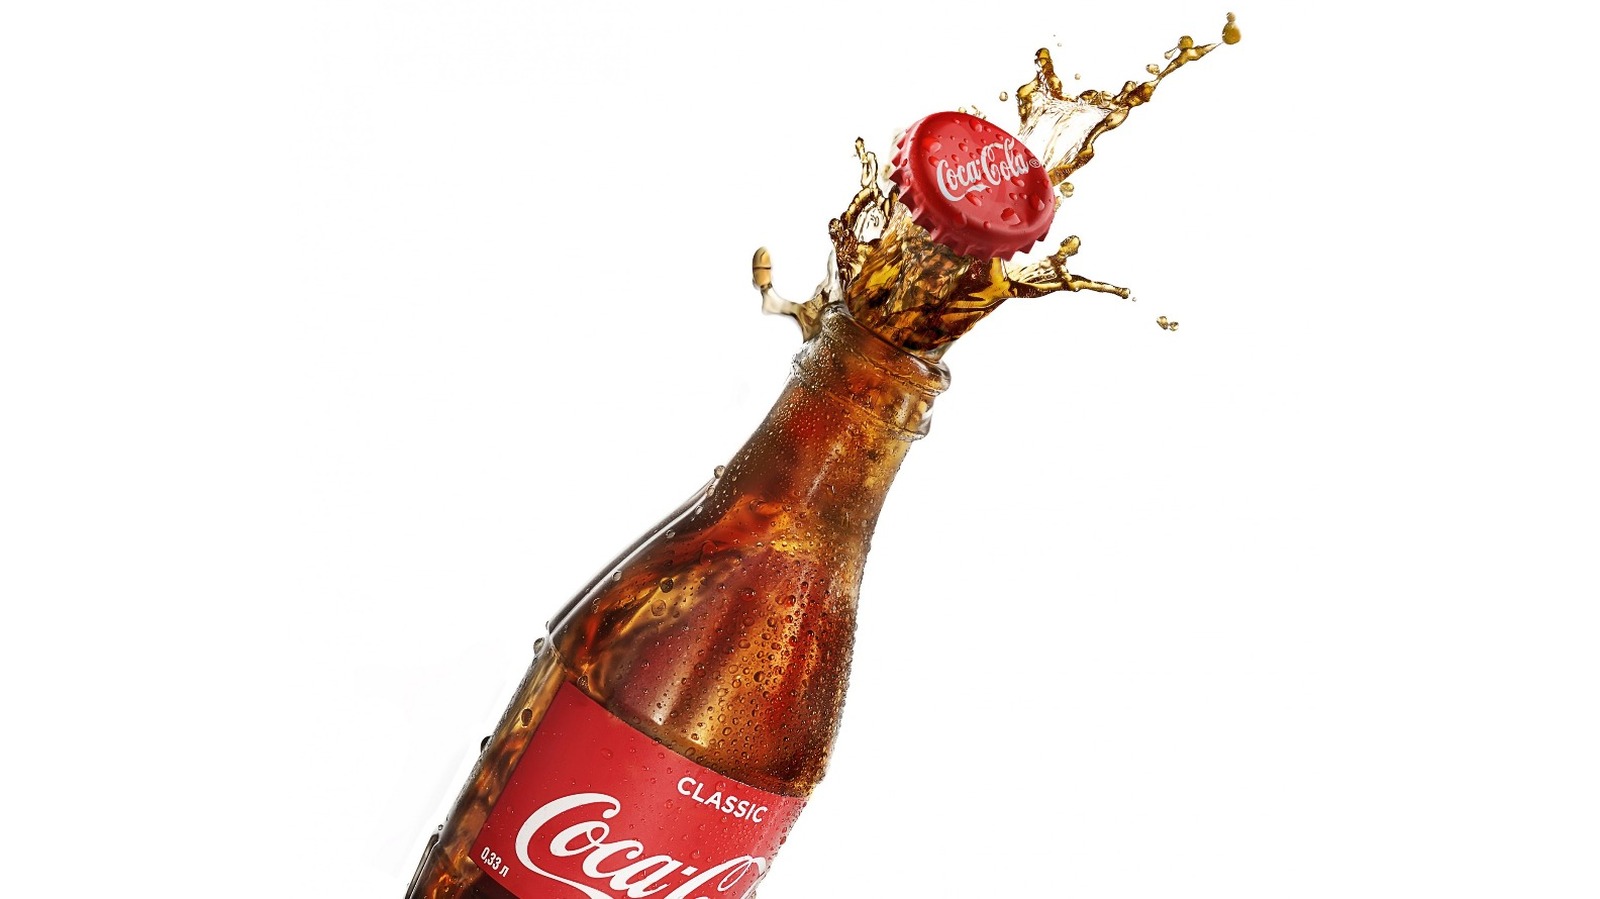 https://www.mashed.com/img/gallery/the-absolute-best-ways-to-drink-a-coca-cola/l-intro-1659558957.jpg